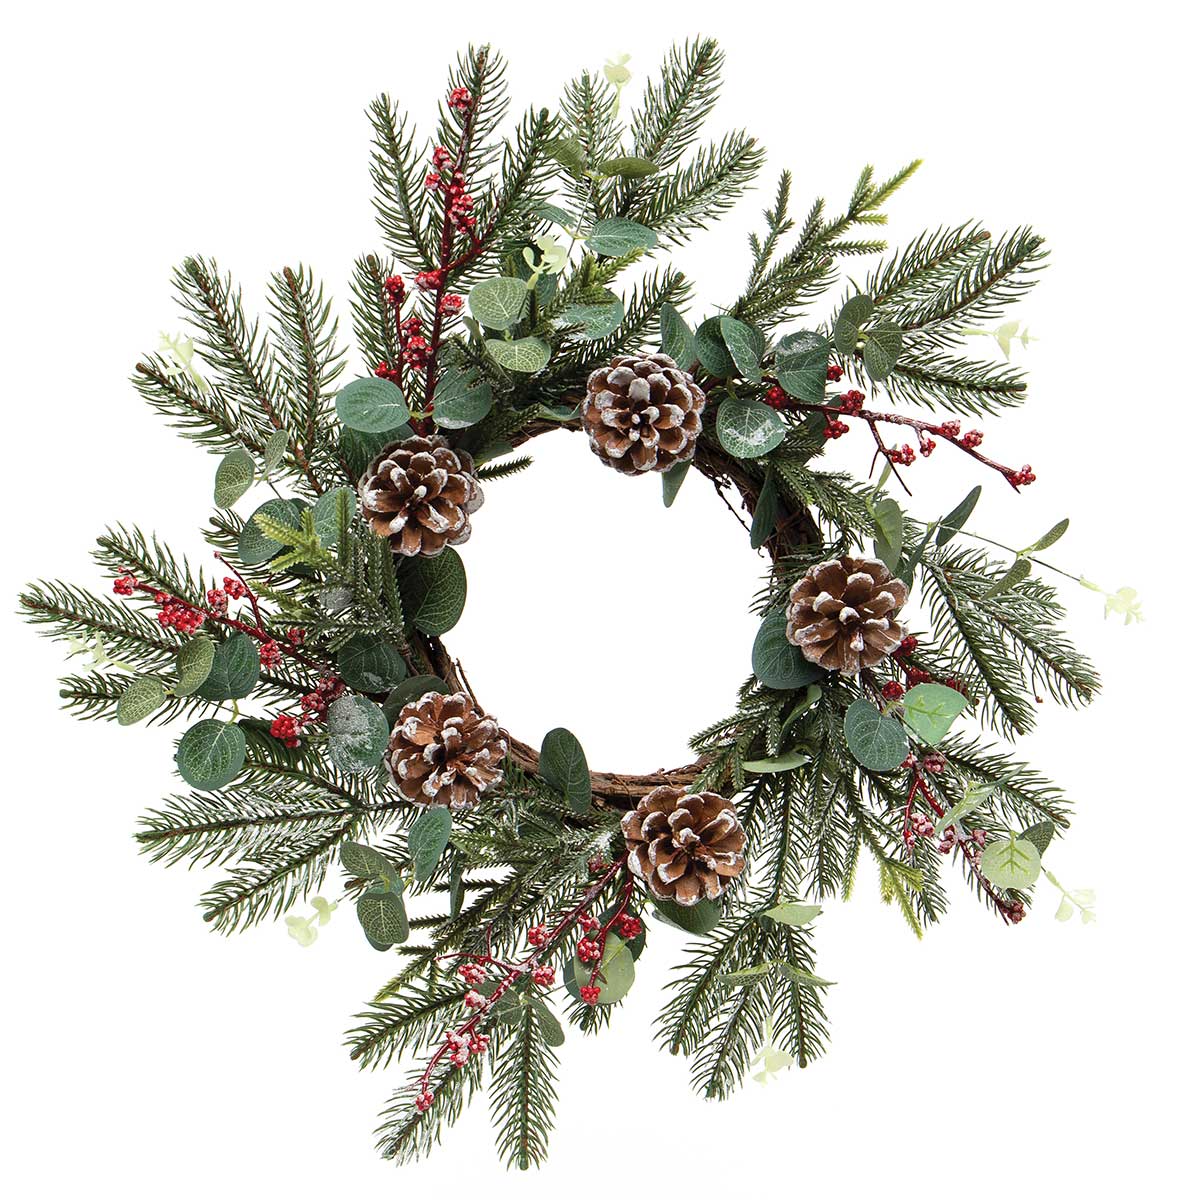 b50 WREATH HOLIDAY BERRY PINE 22IN PLASTIC/POLYESTER/PINECONES